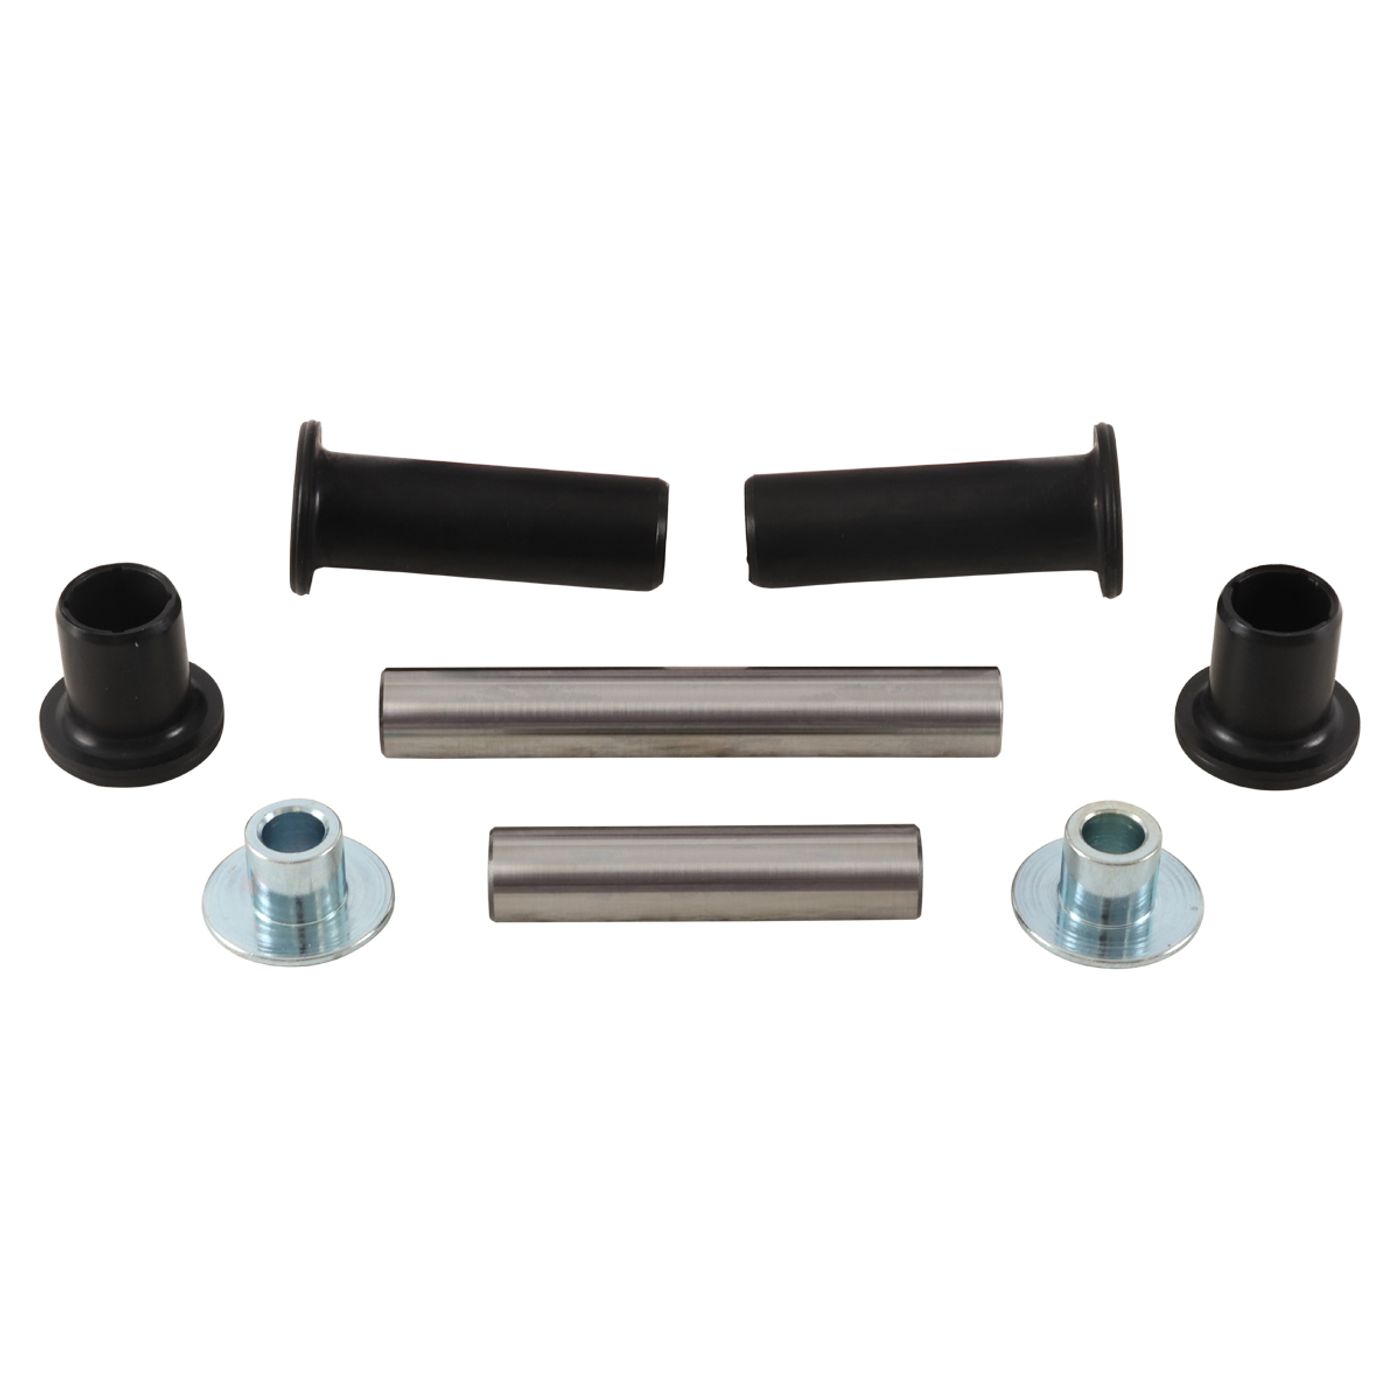 Wrp Rear Ind. Suspension Kits - WRP501210 image